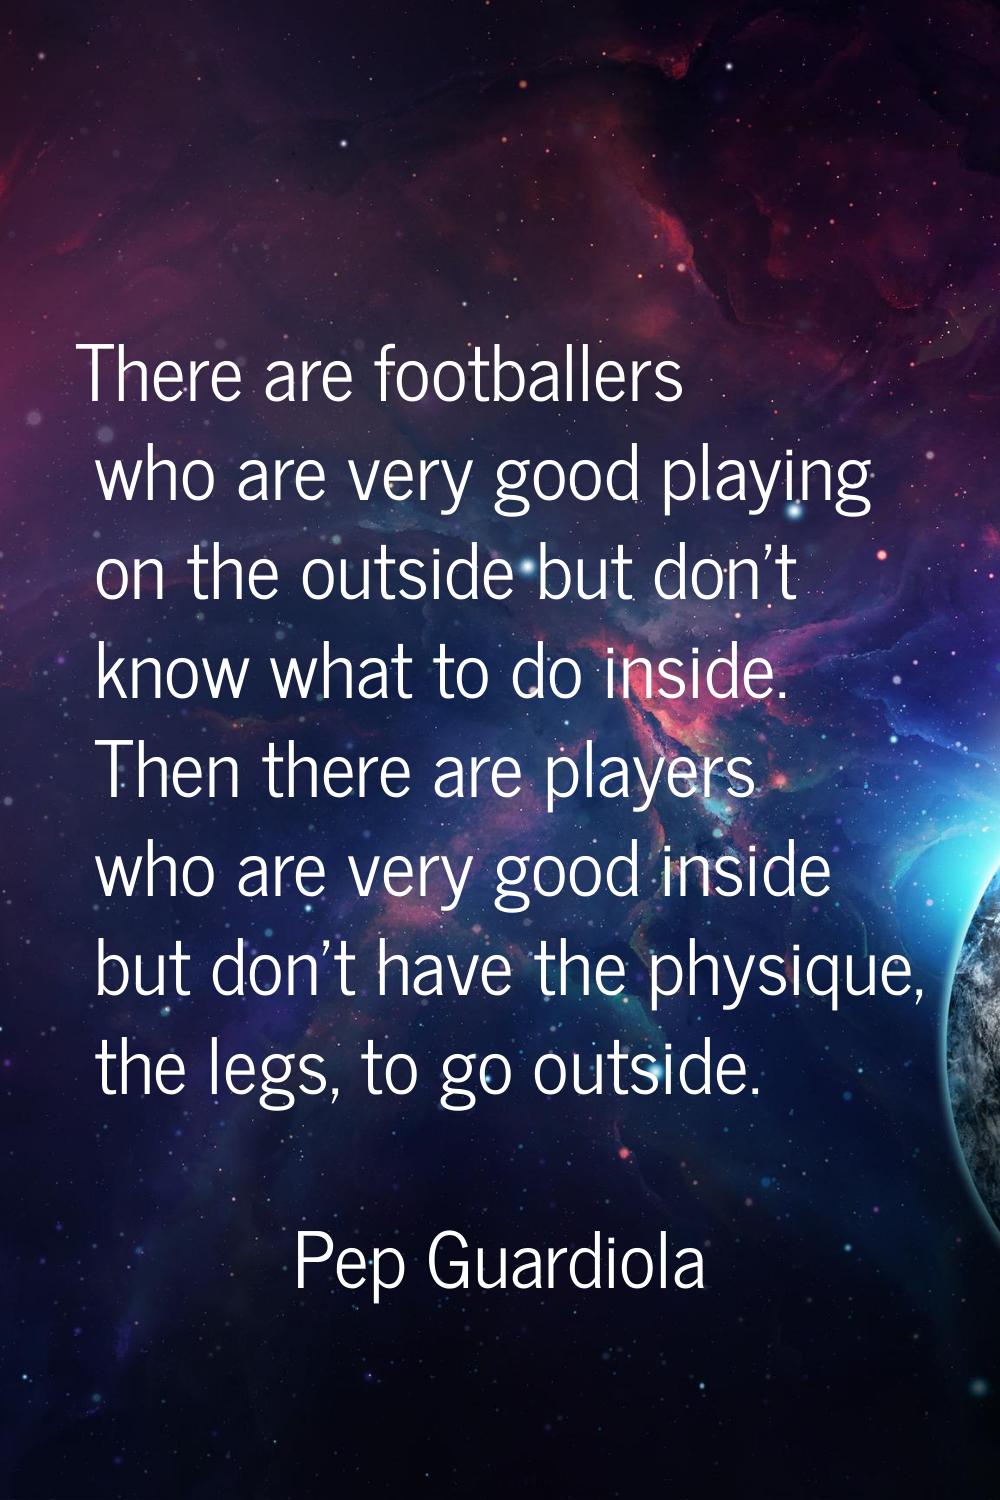 There are footballers who are very good playing on the outside but don't know what to do inside. Th